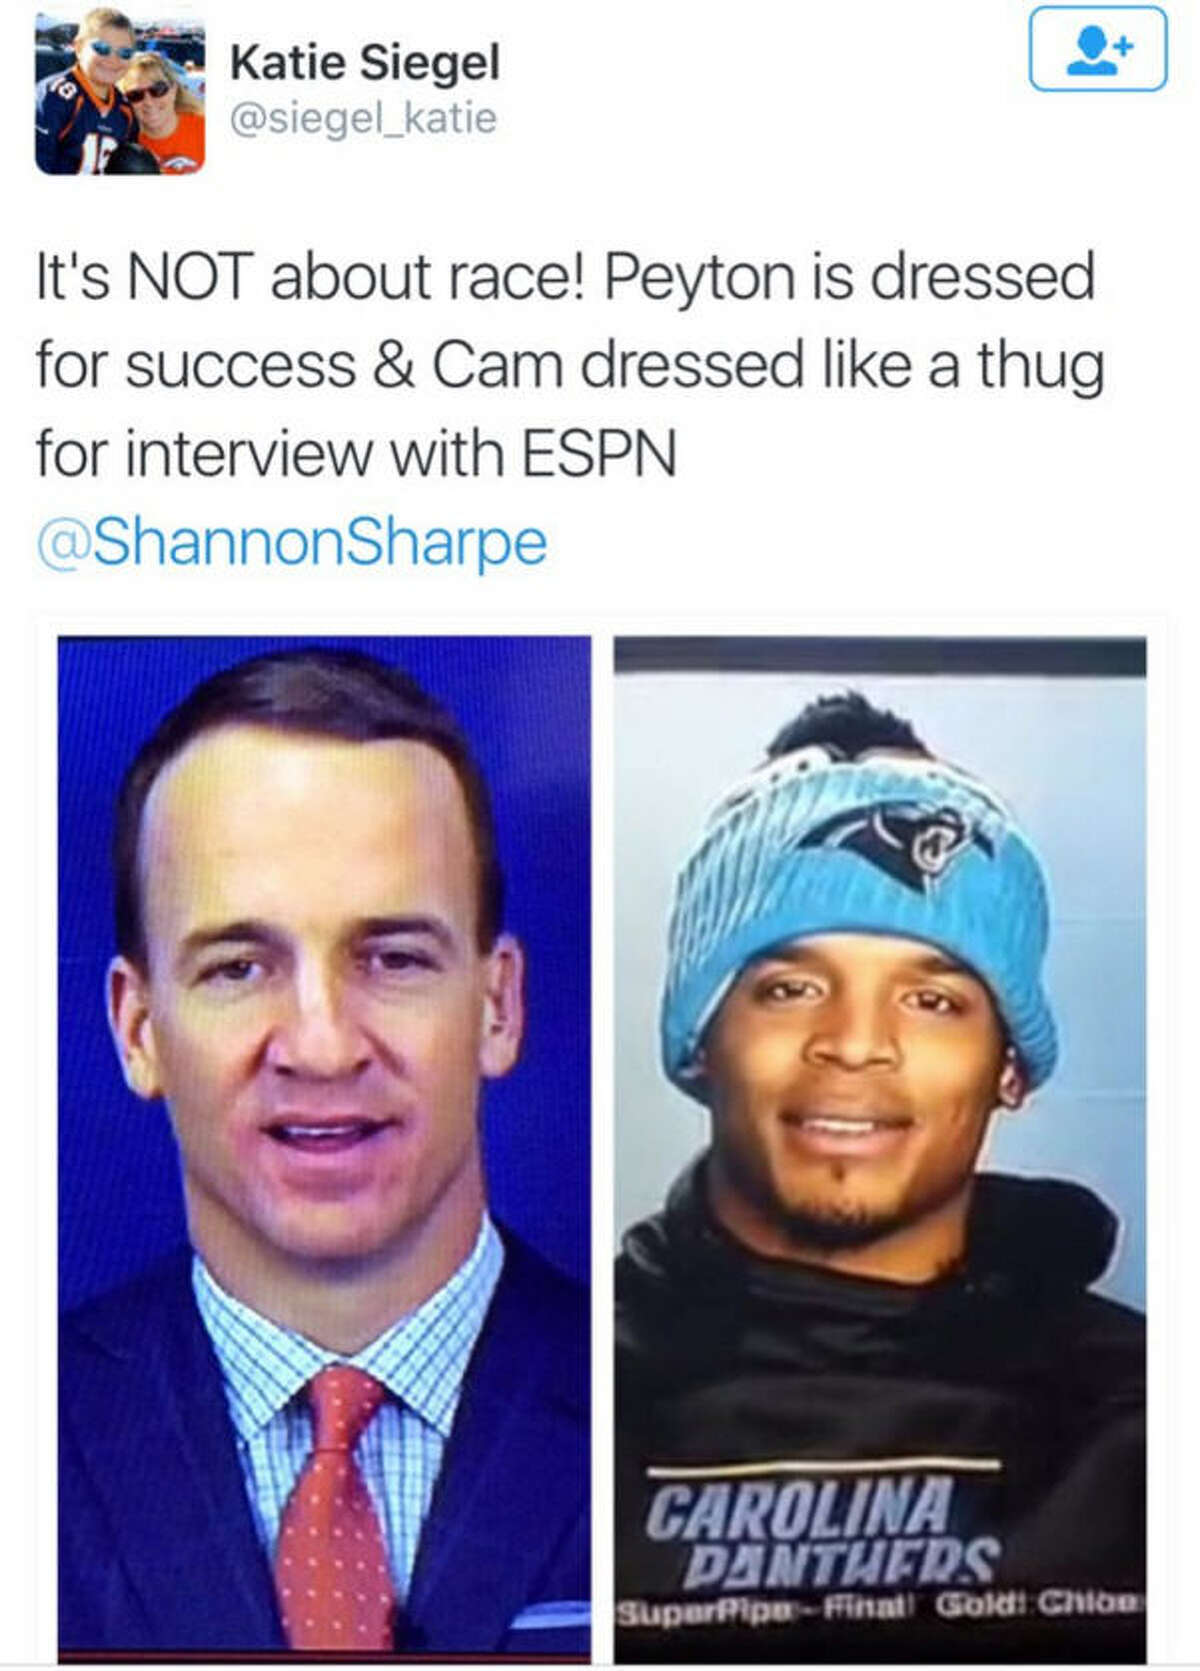 This tweet calling Cam Newton a thug because of how he dressed for an ESPN interview sparked a wave of mocking tweets showing the clothing choices for other NFL players during interviews.